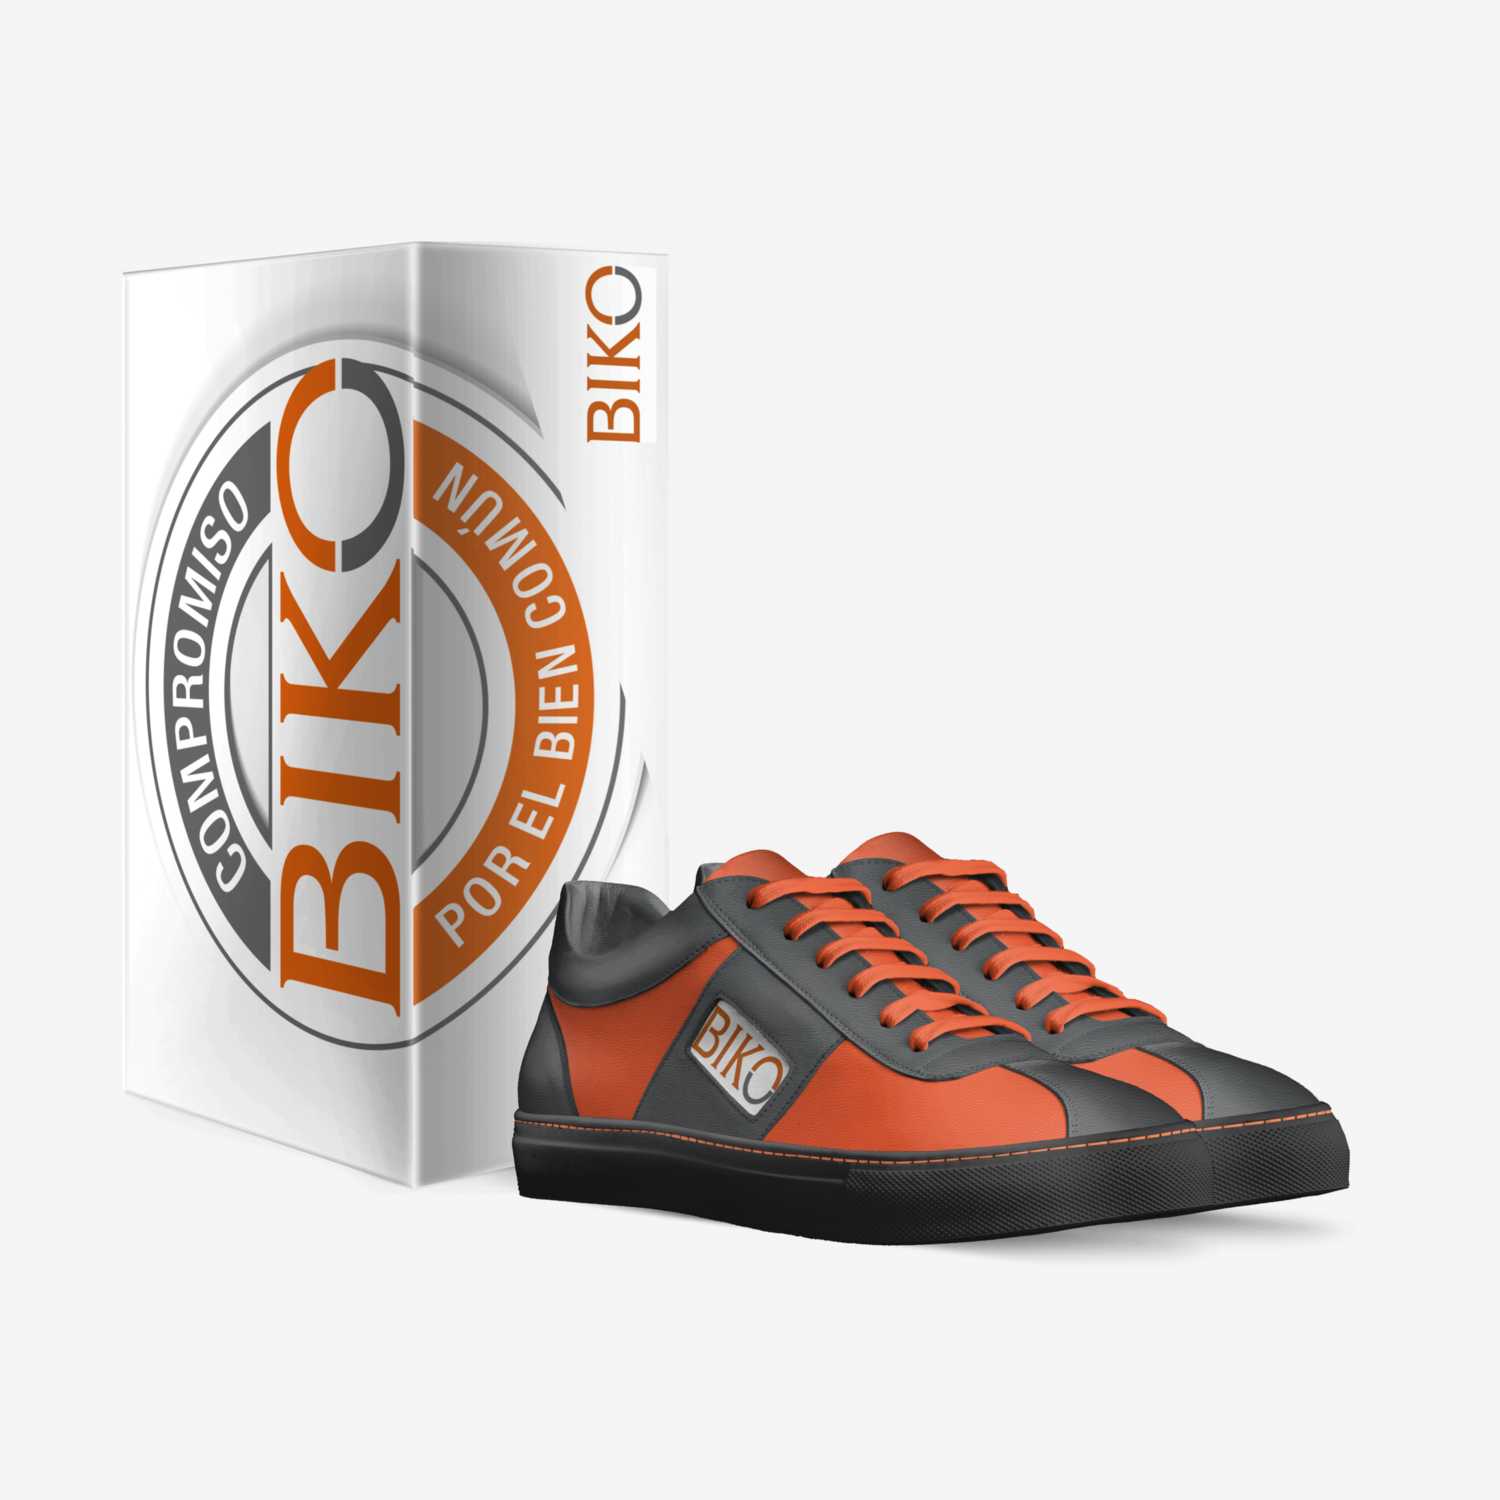 biko custom made in Italy shoes by Ivan Del Caz | Box view